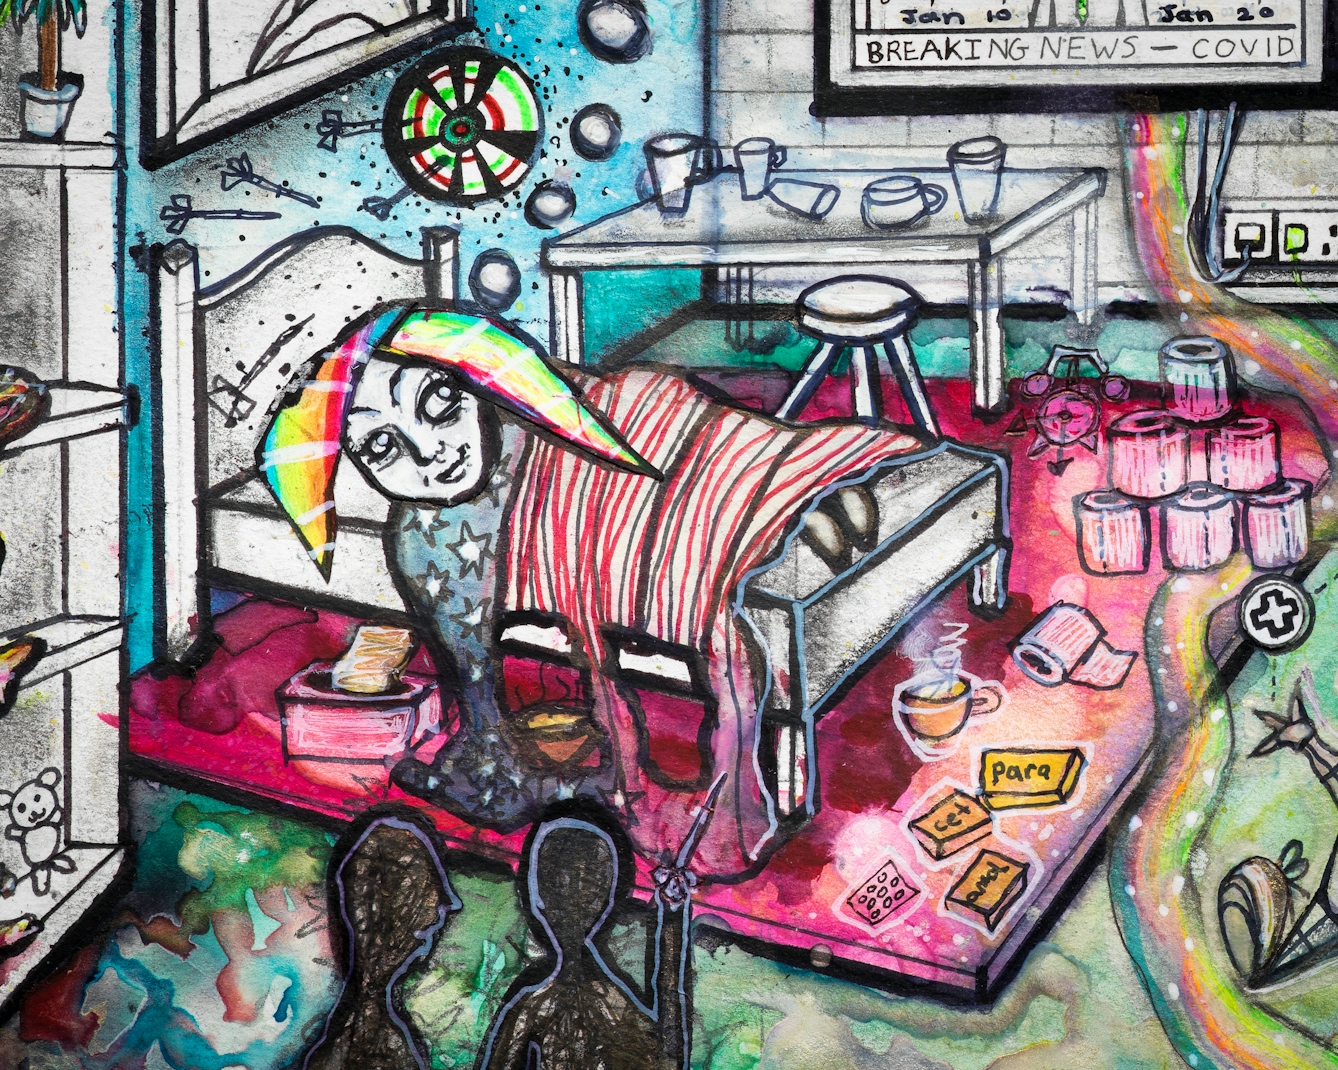 Artwork using watercolour and ink incorporating collaged words throughout the scene. The artwork shows a busy multi-coloured room. On the left hand side of the image a woman with rainbow coloured hair is lying in bed.  On the floor there are: packets of paracetamol; toilet rolls; and a toy clown juggling first aid, corona virus and pound symbols. In the foreground the silhouette of two people stand together at a distance from the bed.